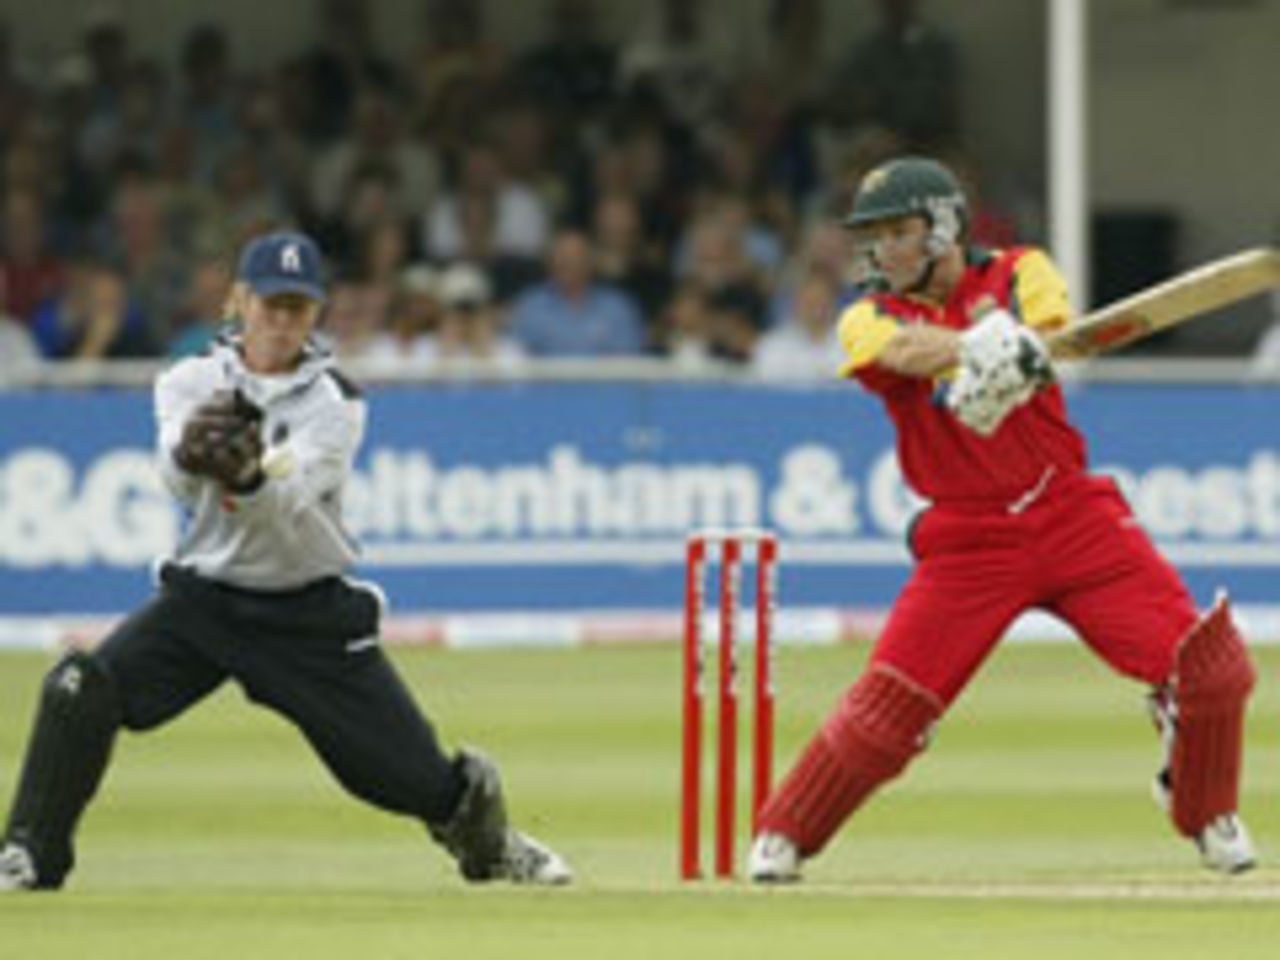 Man of the match Brad Hodge attacks for Leicestershire in their losing semi-final against Warwickshire in the Twenty20 Cup